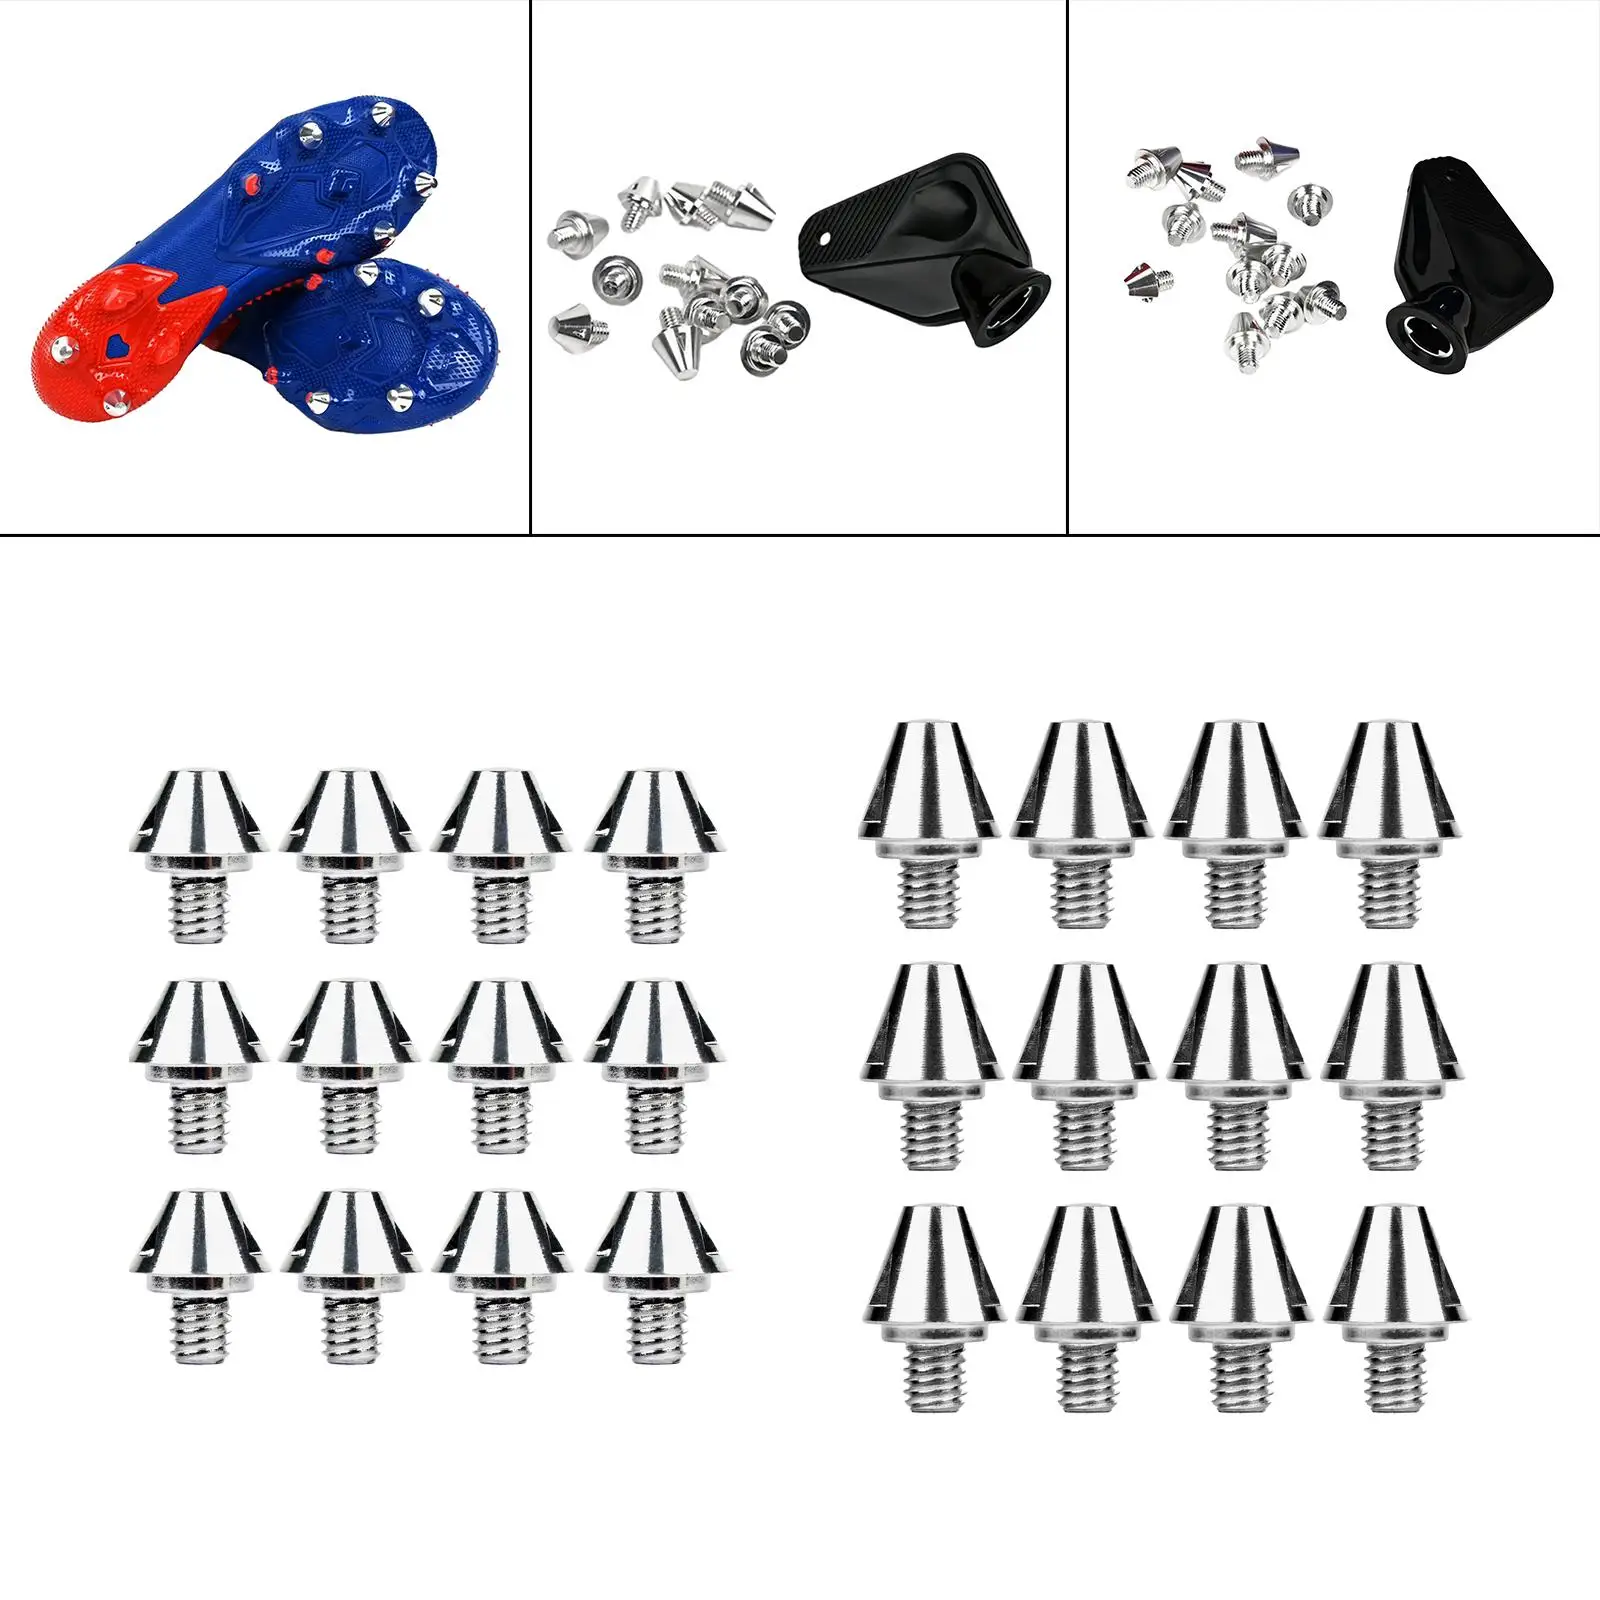 12Pcs Rugby Studs Firm Ground M6 Threading Screw Durable Track Shoes Accessories for Competition Indoor Outdoor Sports Training